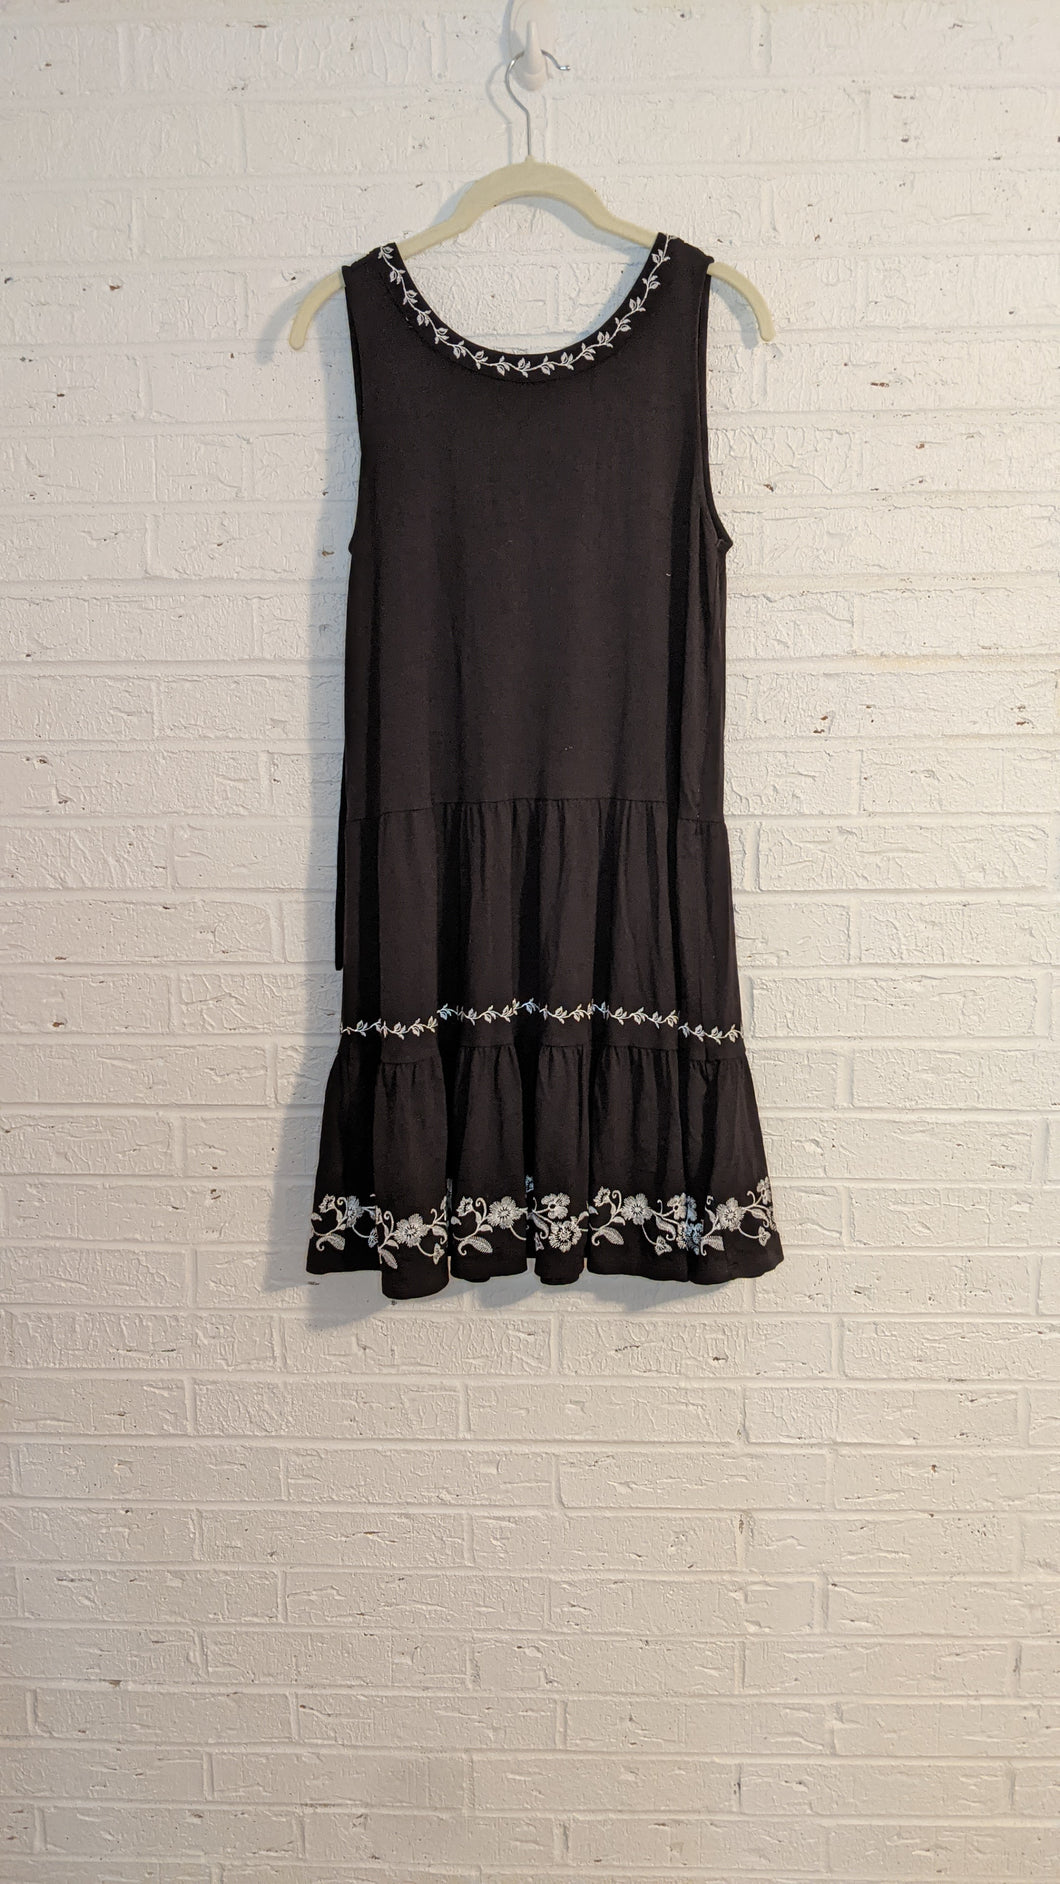 S/M - black and white embroidered tiered dress